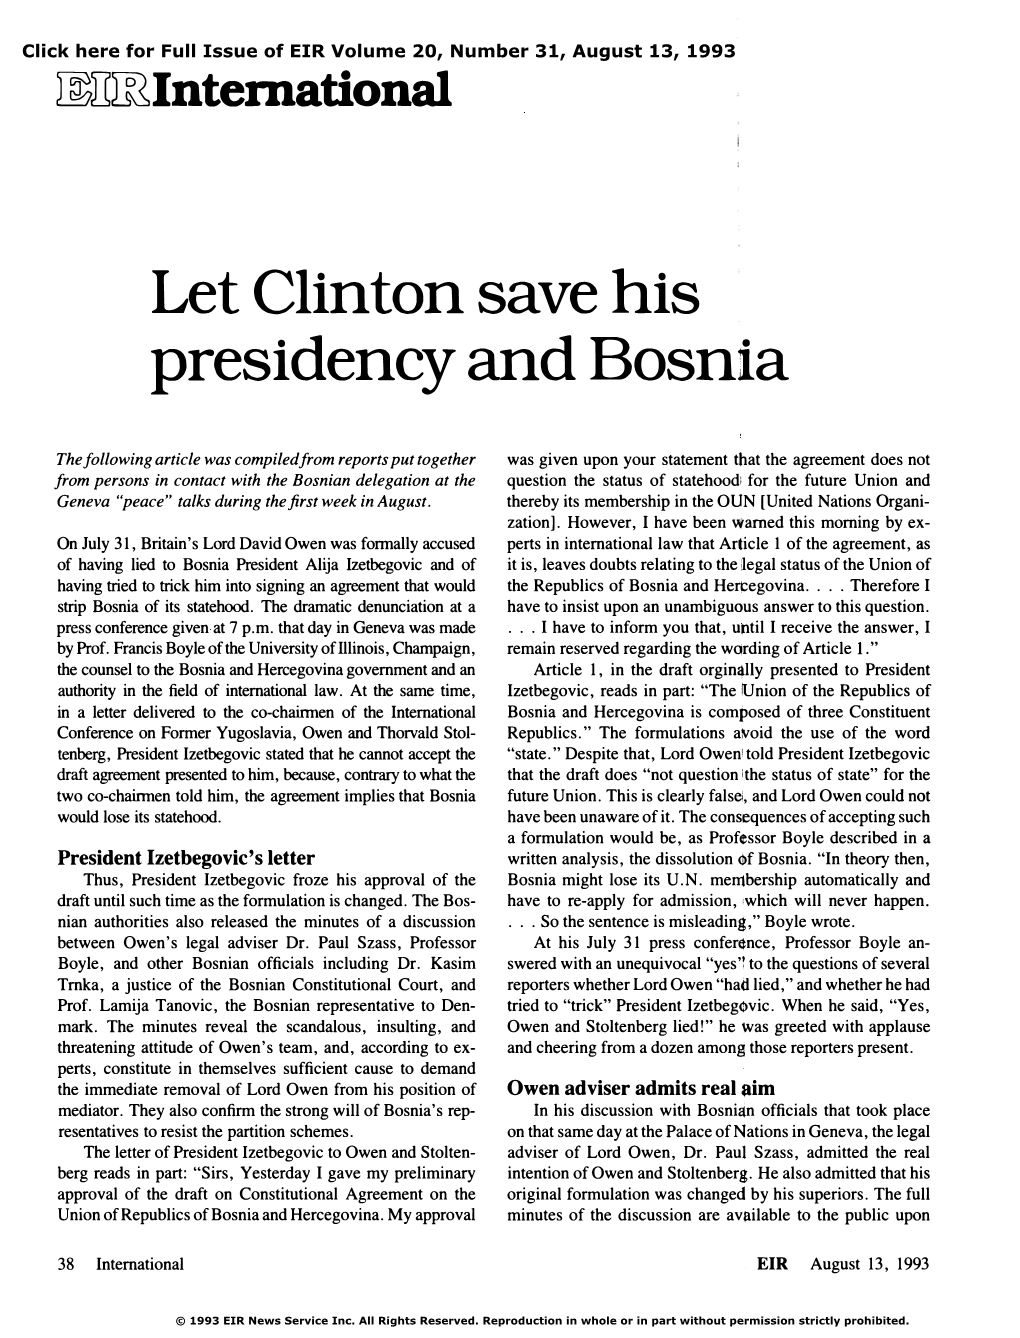 Let Clinton Save His Presidency and Bosnia